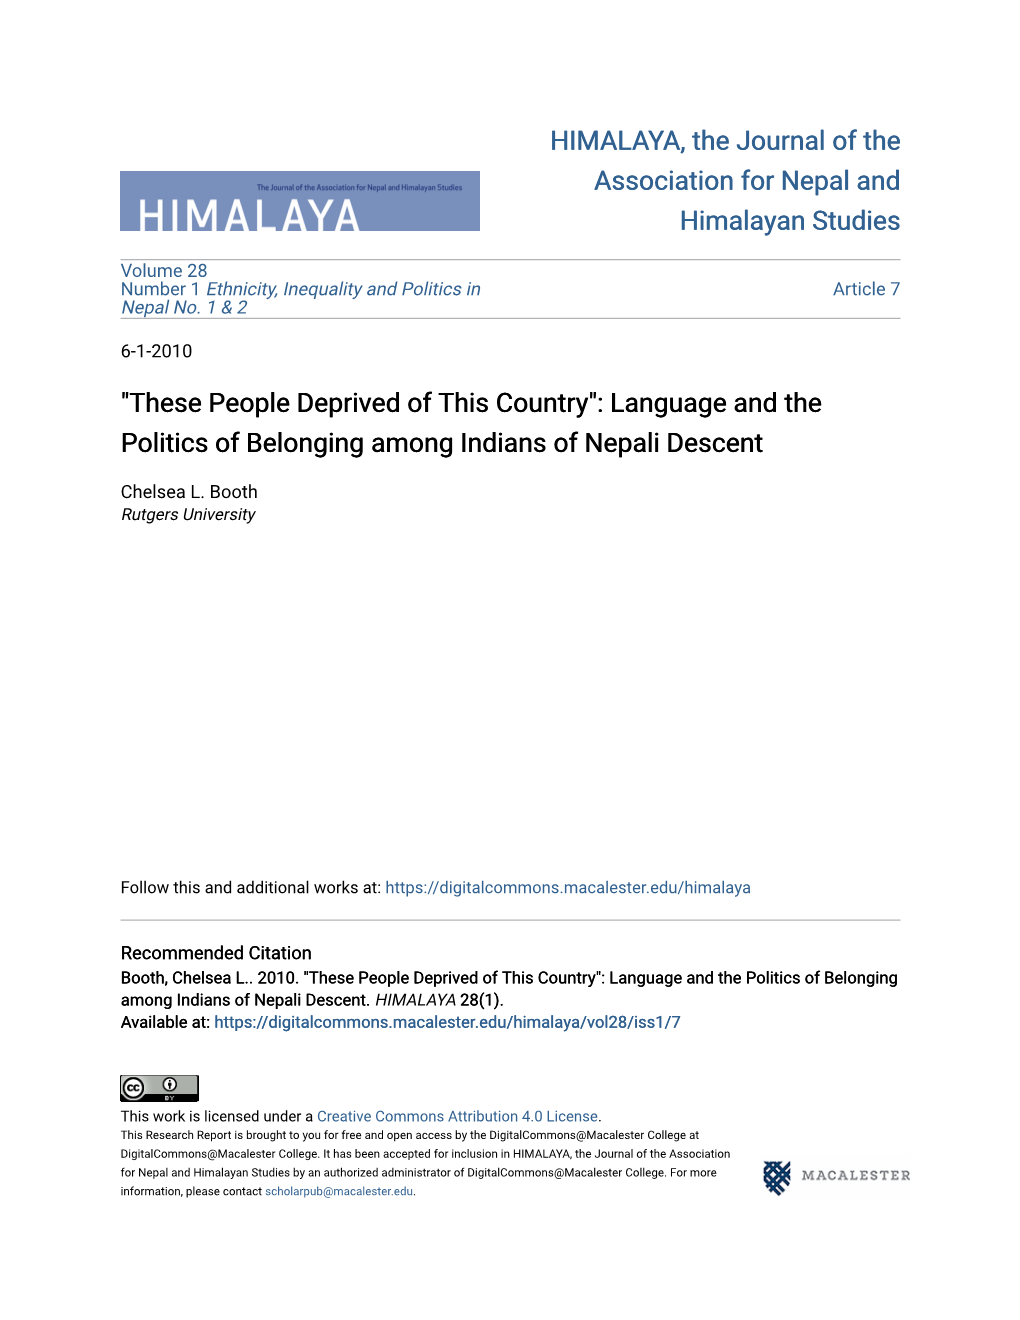 Language and the Politics of Belonging Among Indians of Nepali Descent